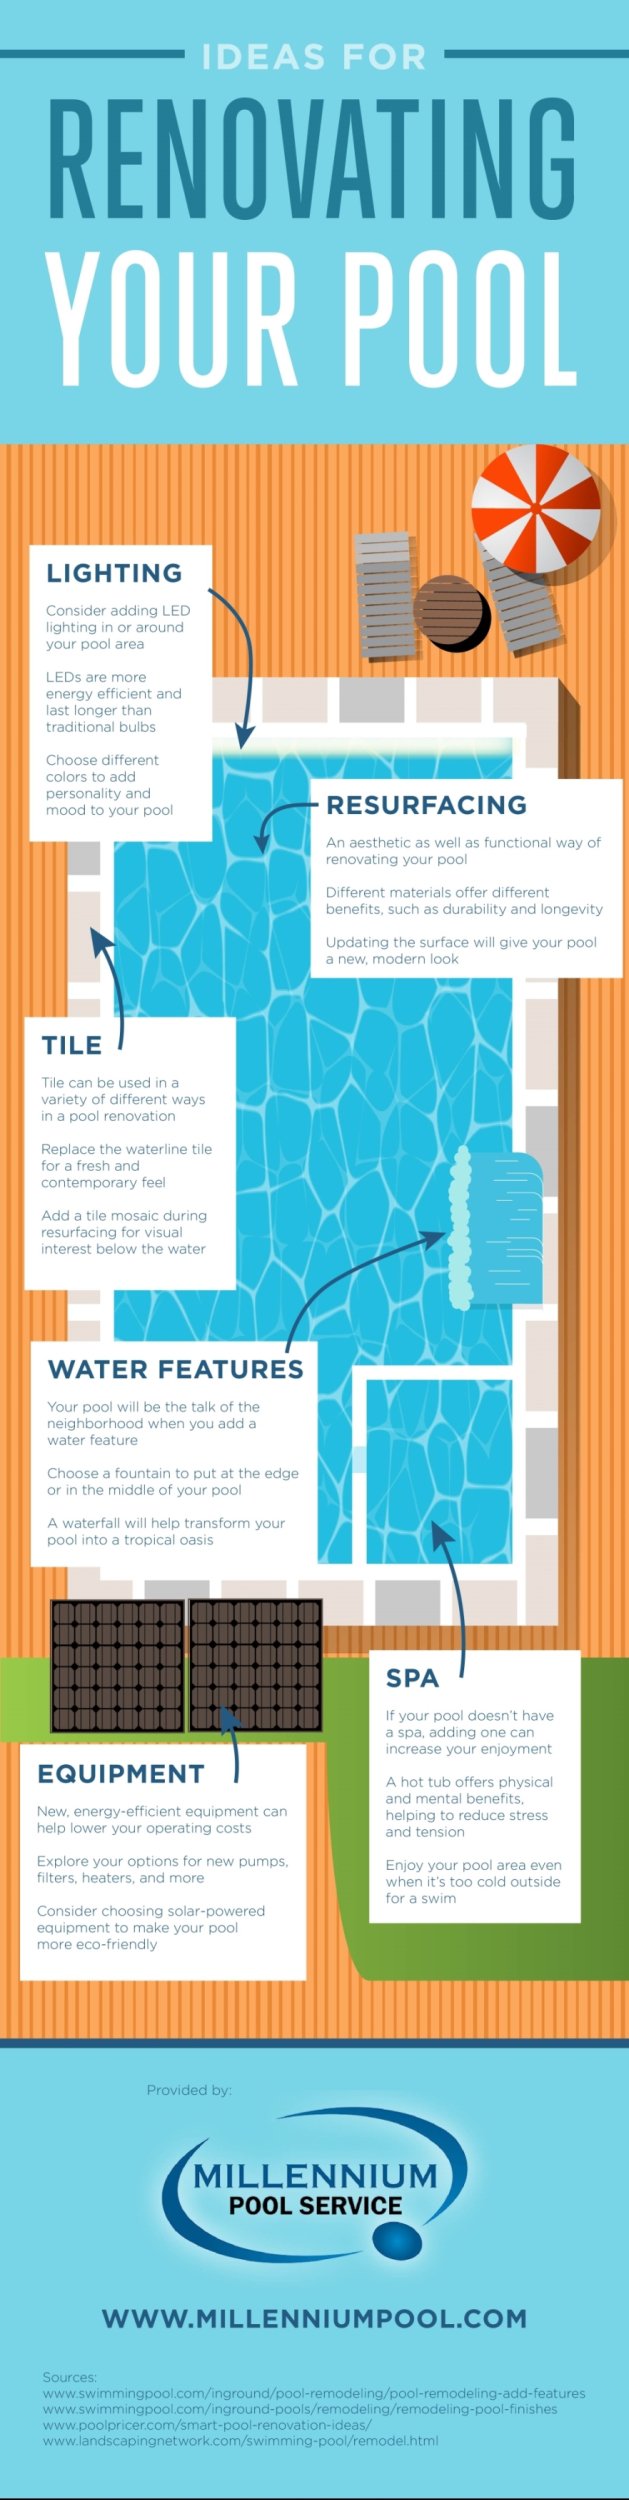 Pool Renovation Infographic by Millennium Pool Service